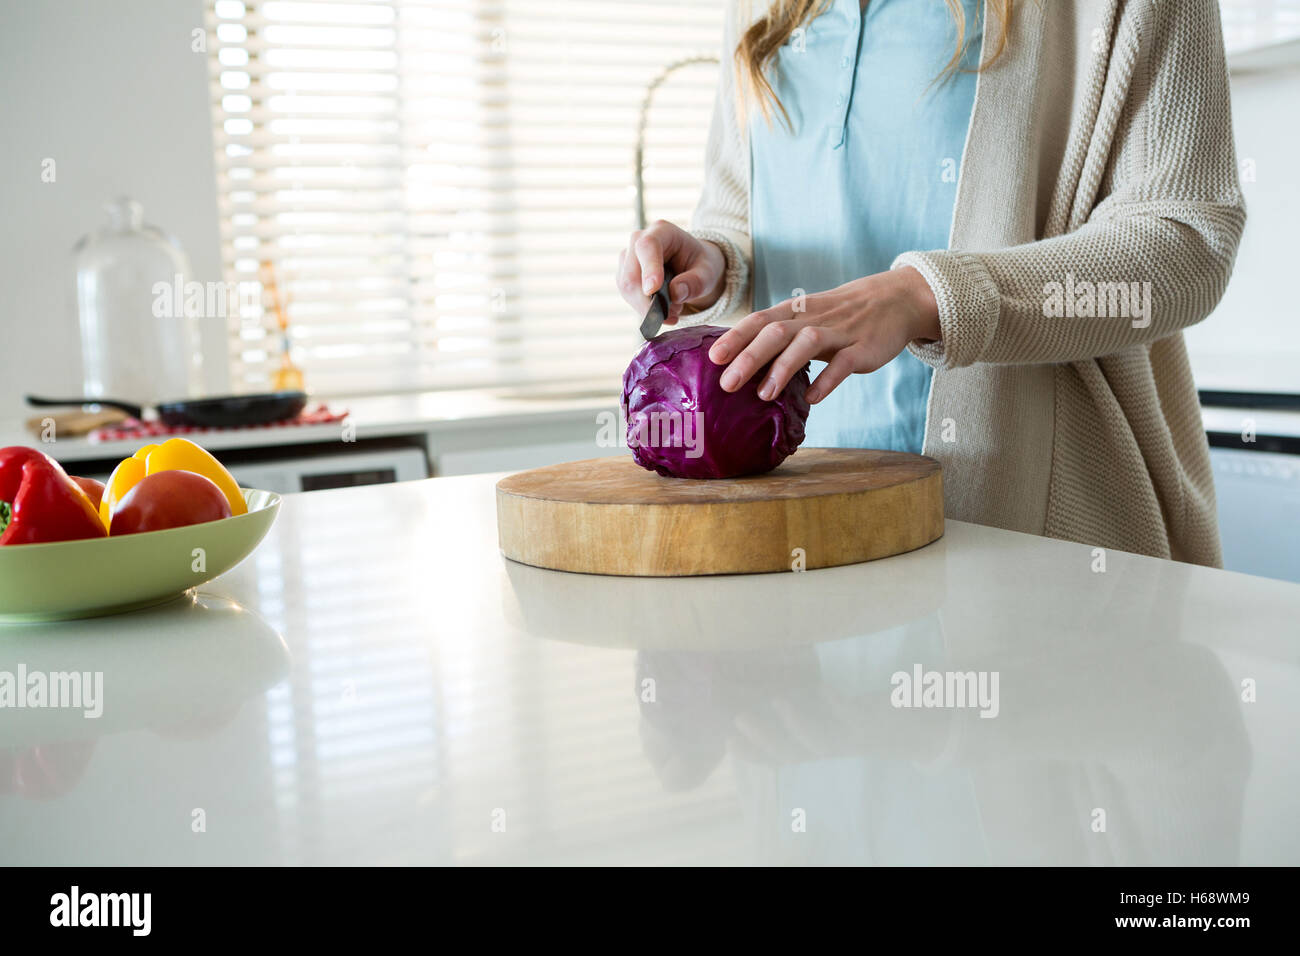 Mid section of woman cutting red cabbage in kitchen Stock Photo